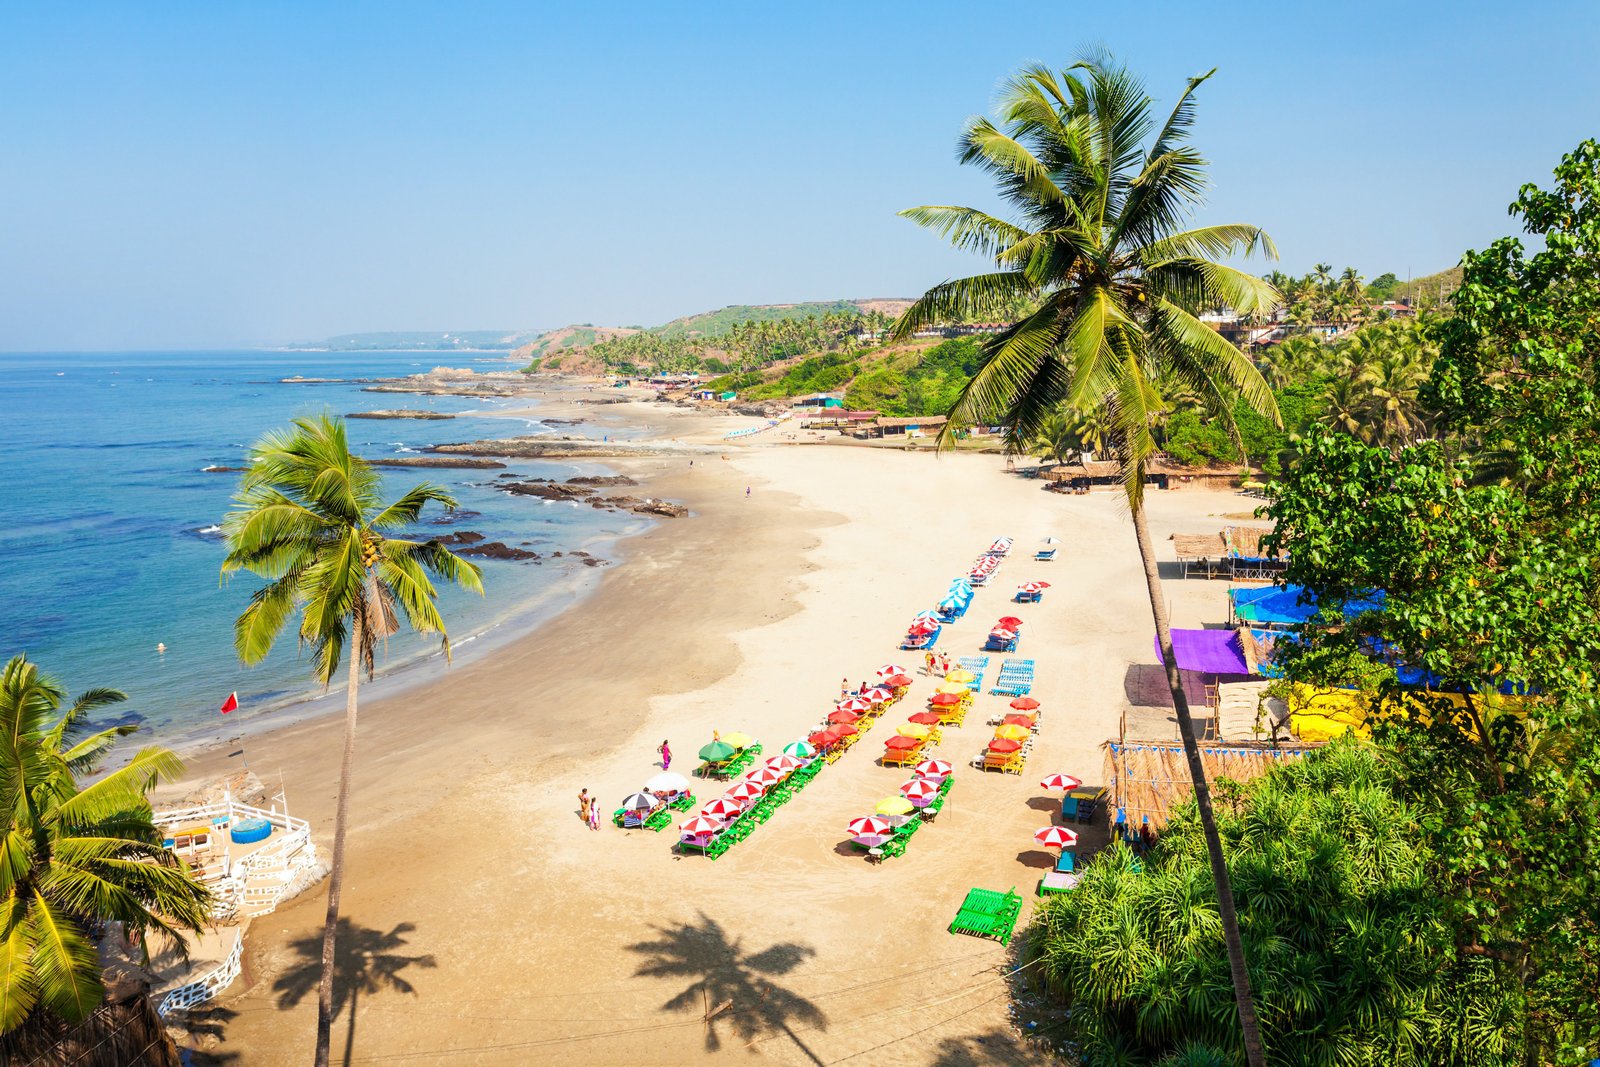 places to visit in goa,what to do in goa,things to do in goa,adventure activities in goa